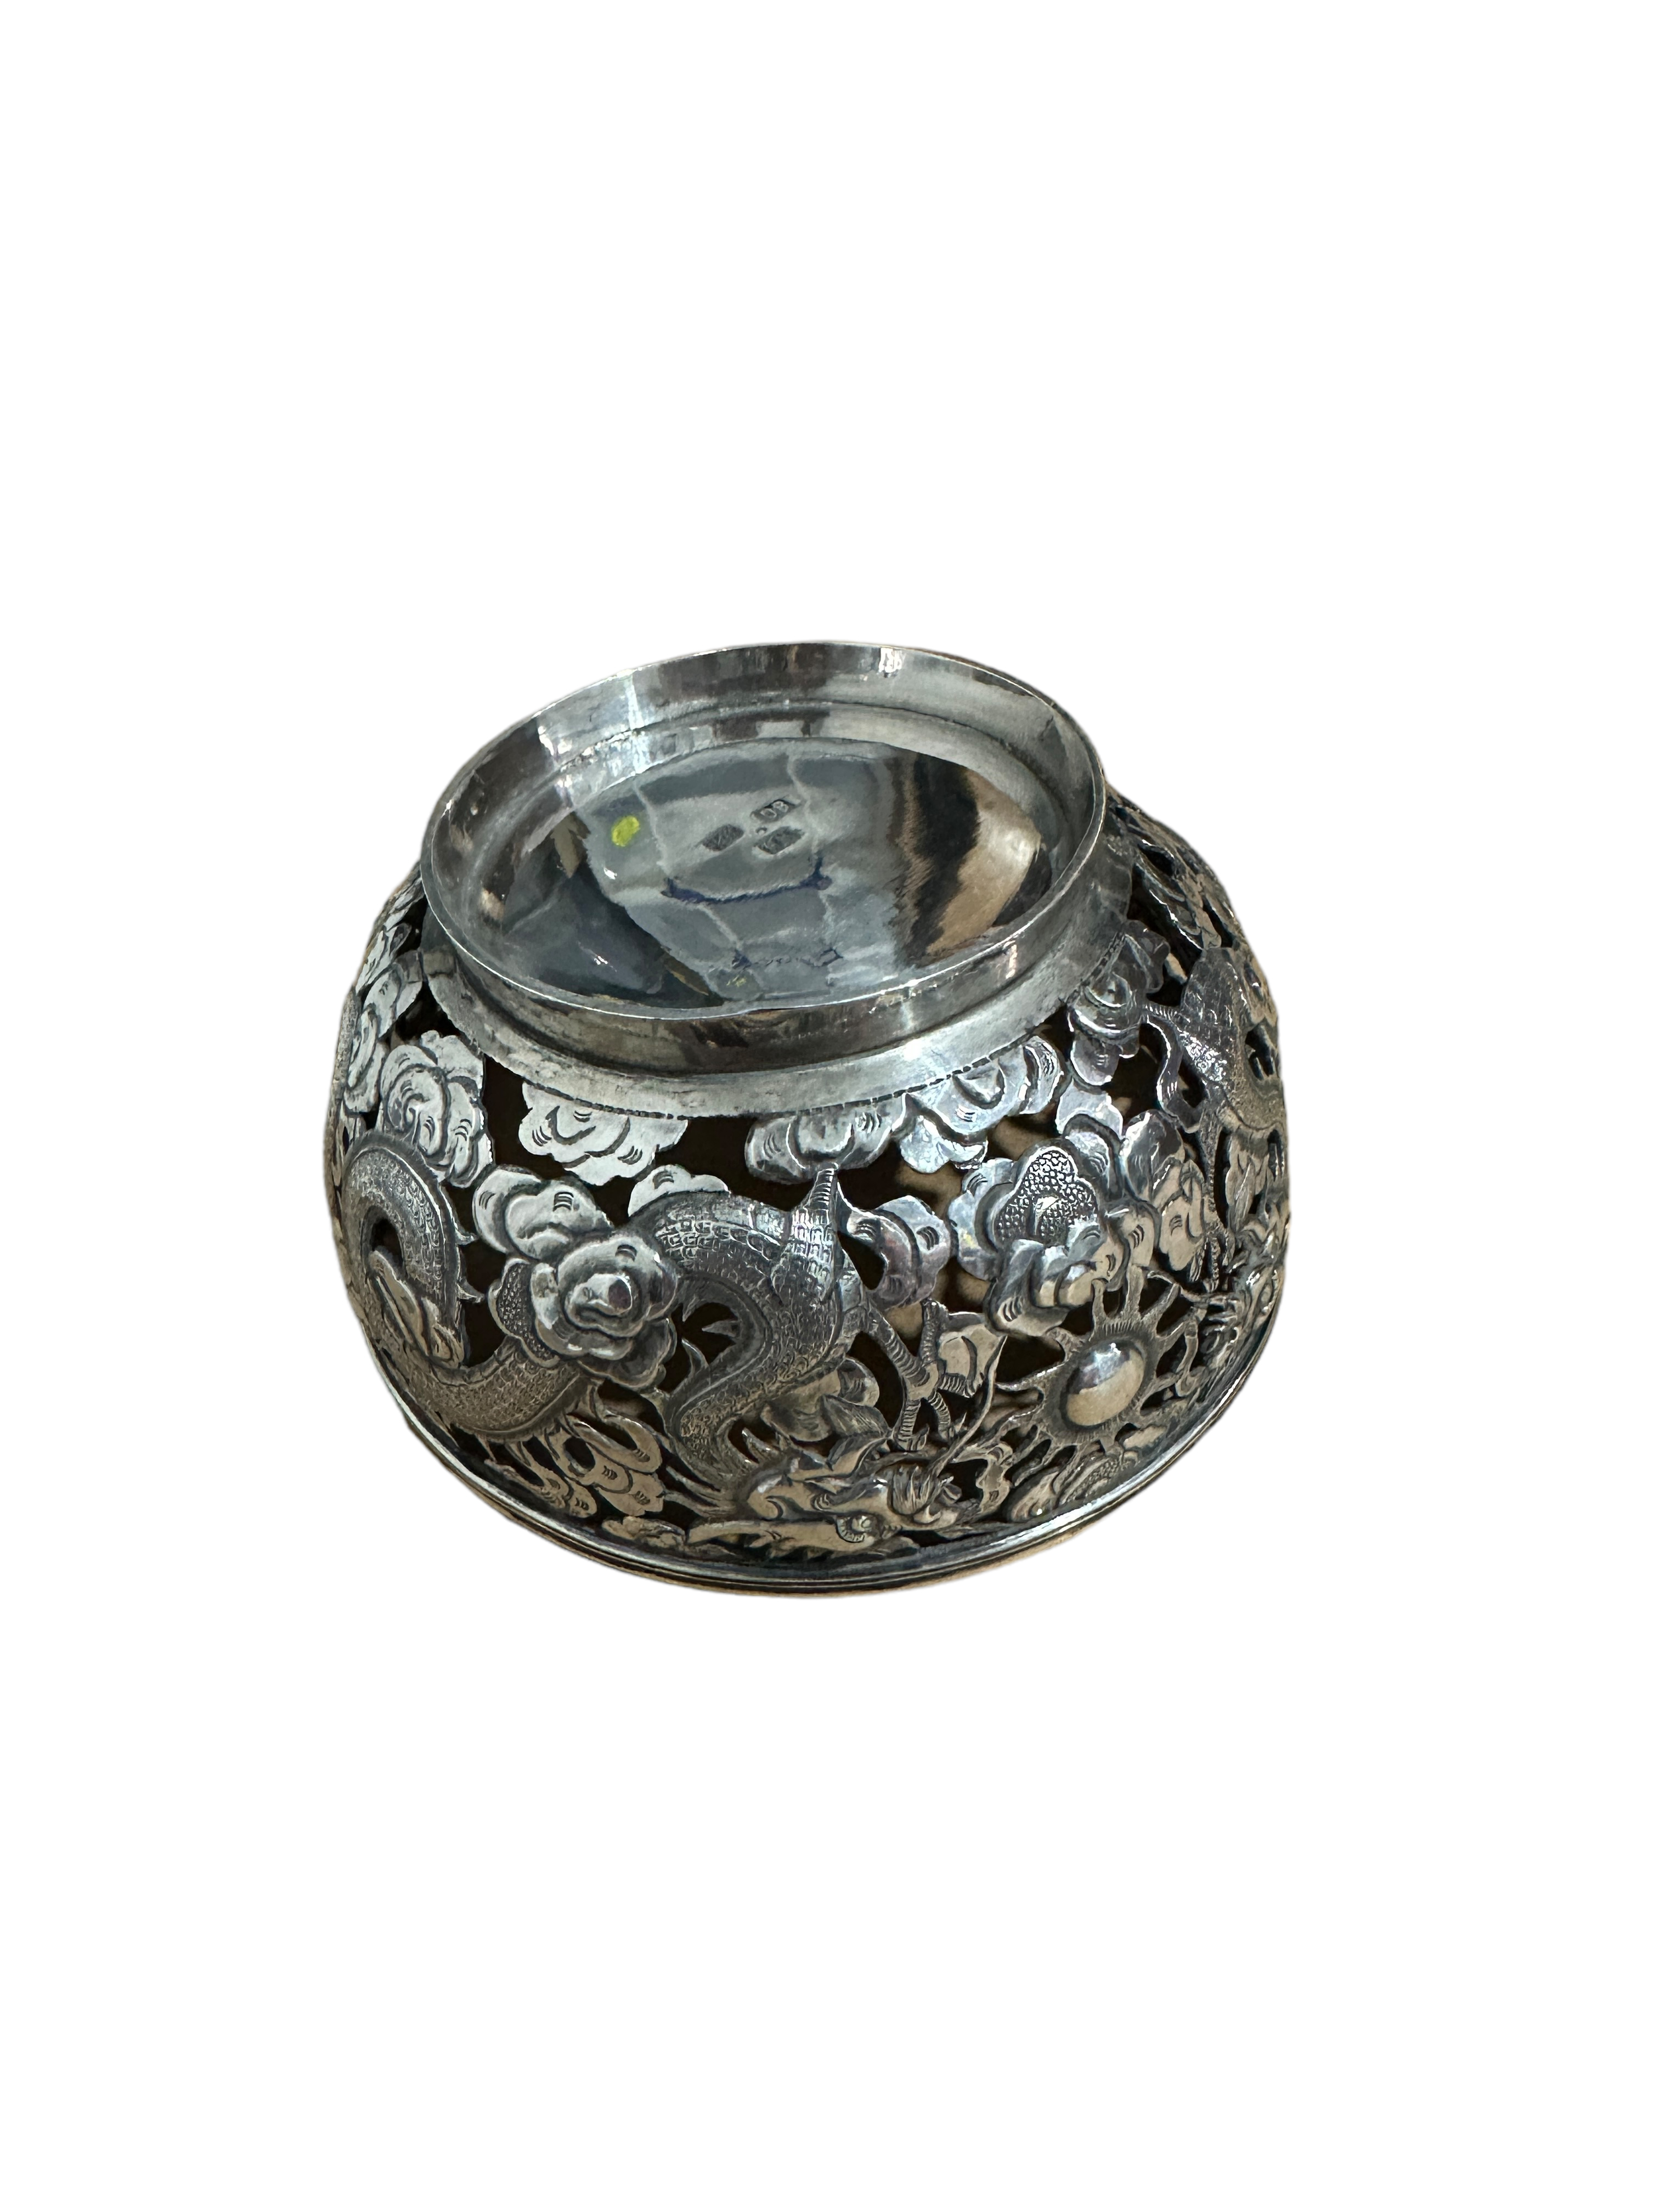 Antique Chinese Export Pierced Silver Bowl - 11.2cm diameter and 5.7cm tall. - Image 7 of 13